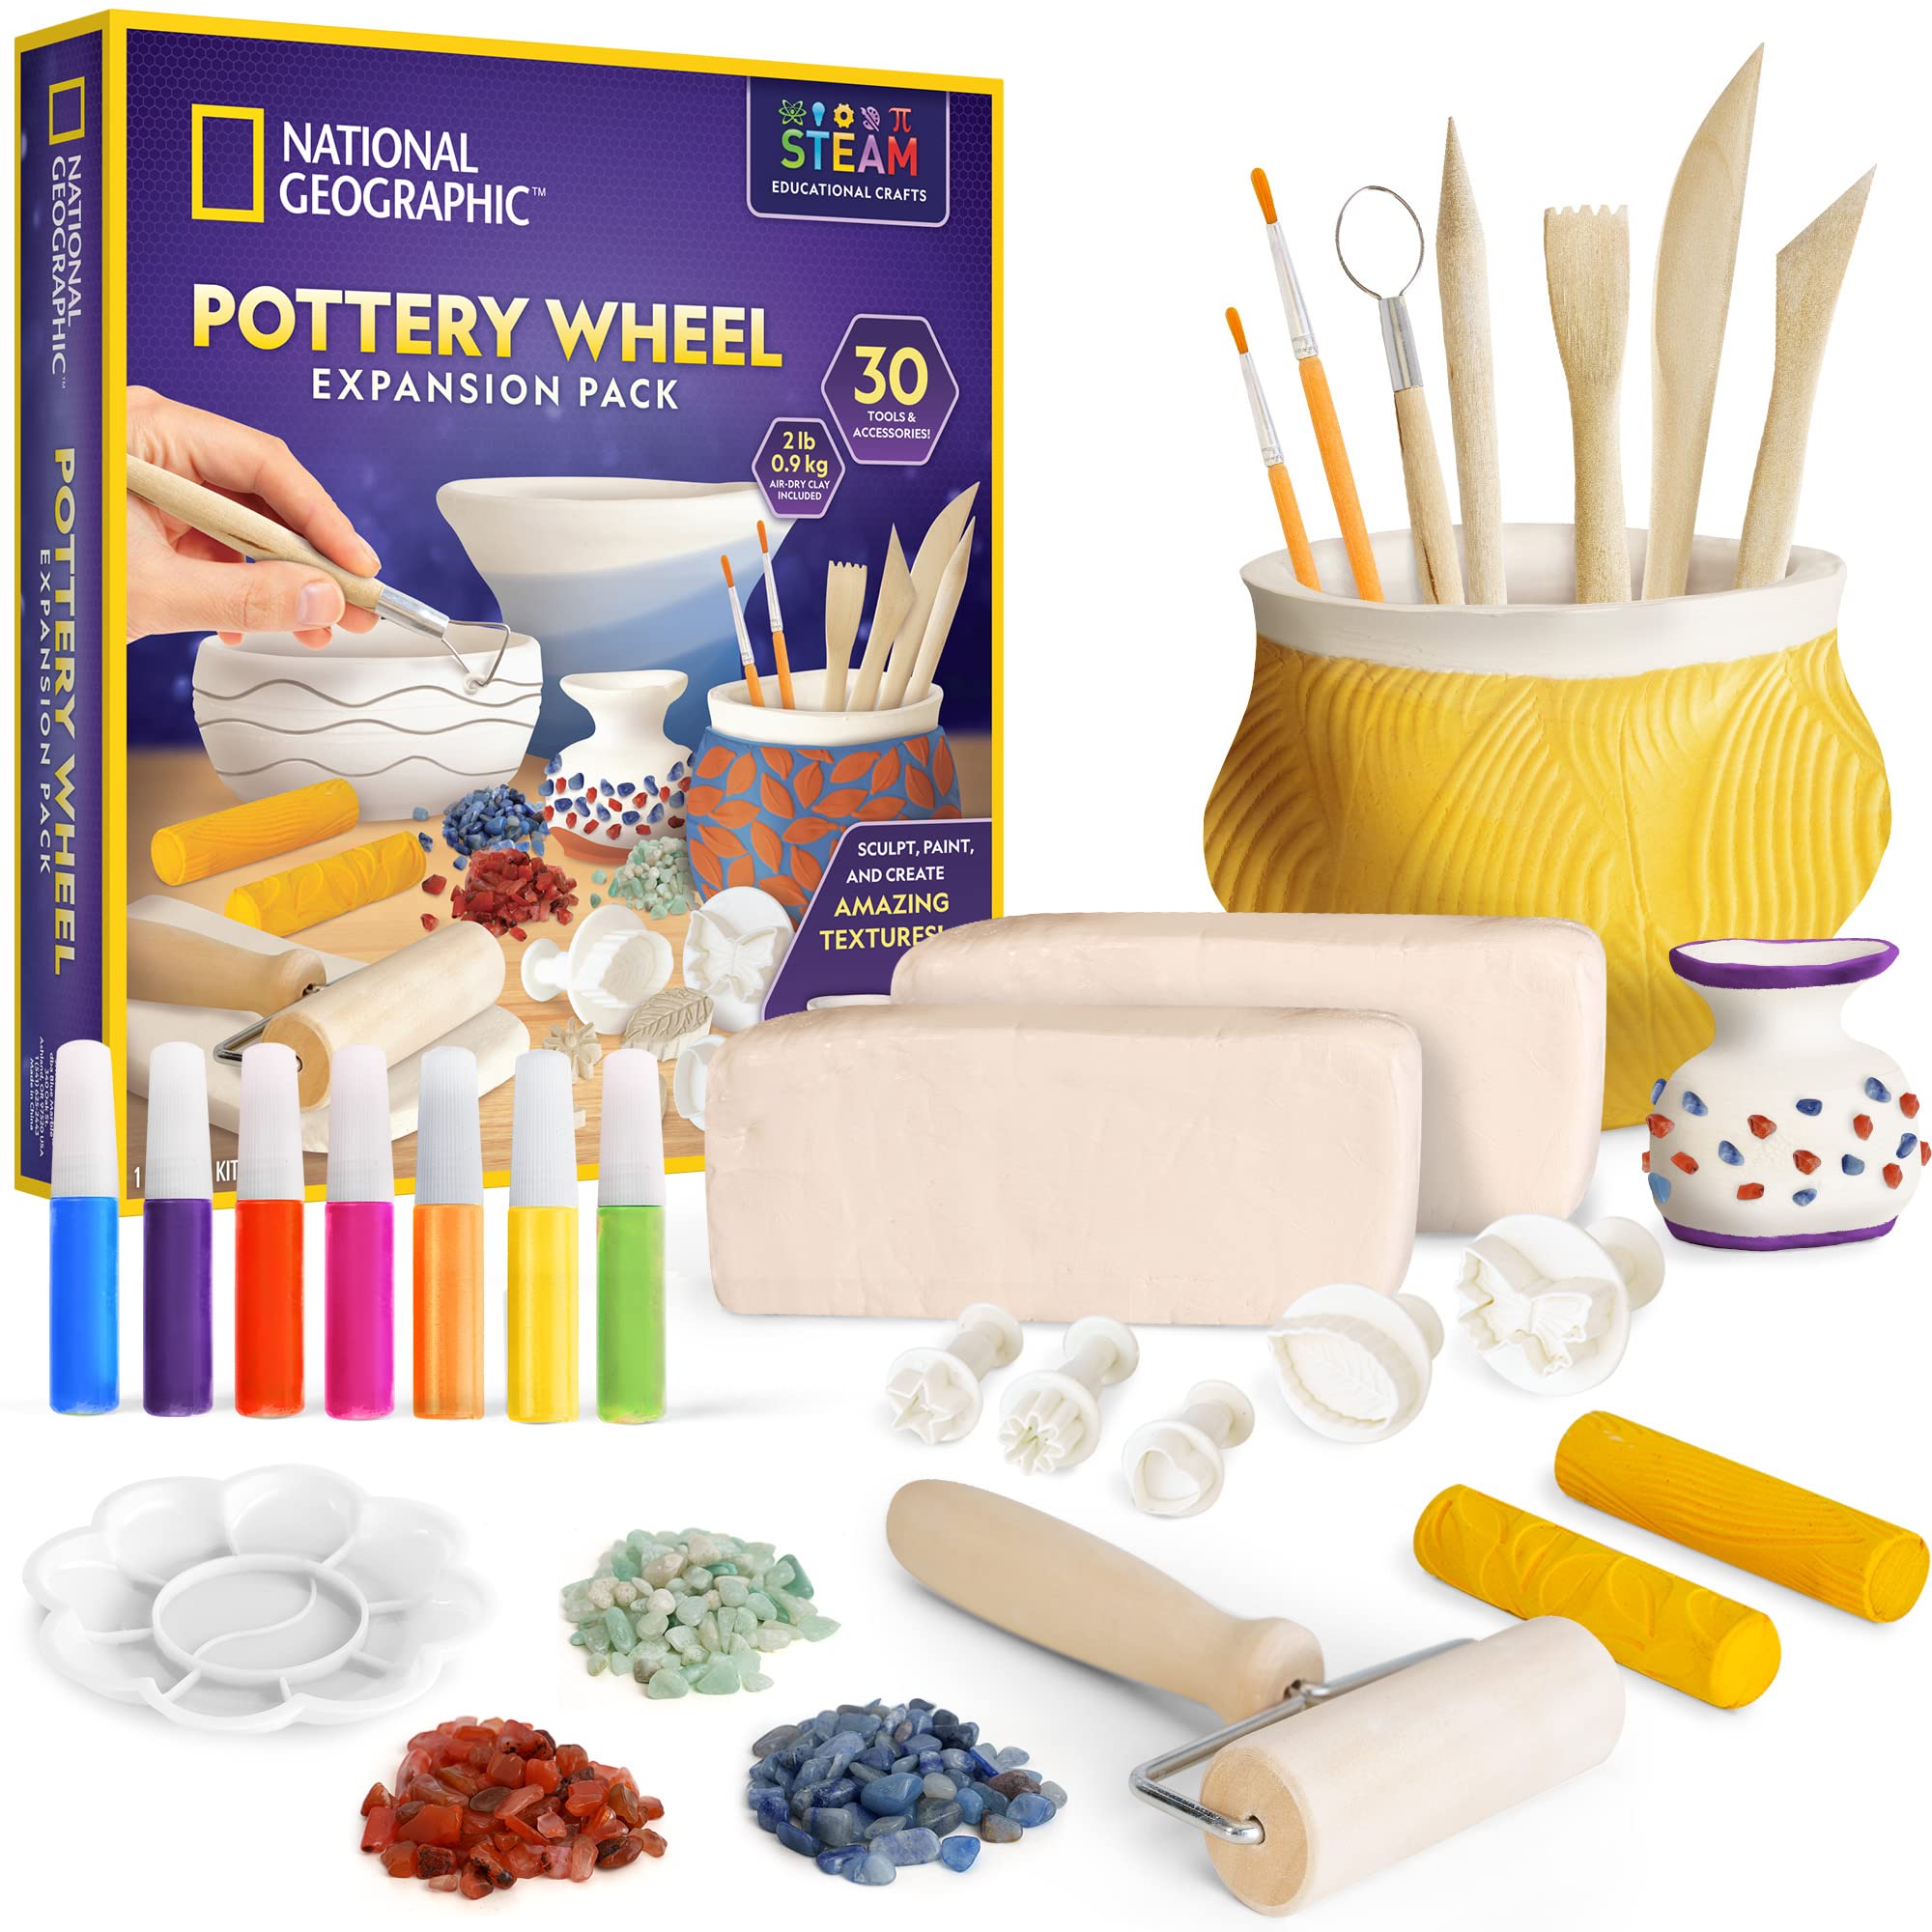 NATIONAL GEOGRAPHIC Pottery Wheel Refill Kit – 2 lbs. Air Dry Clay, 30 Pottery Tools & Accessories, Gemstone Chips, Sculpting Clay Tools, 7 Paints & More, Great Craft Kit for Kids (Amazon Exclusive)